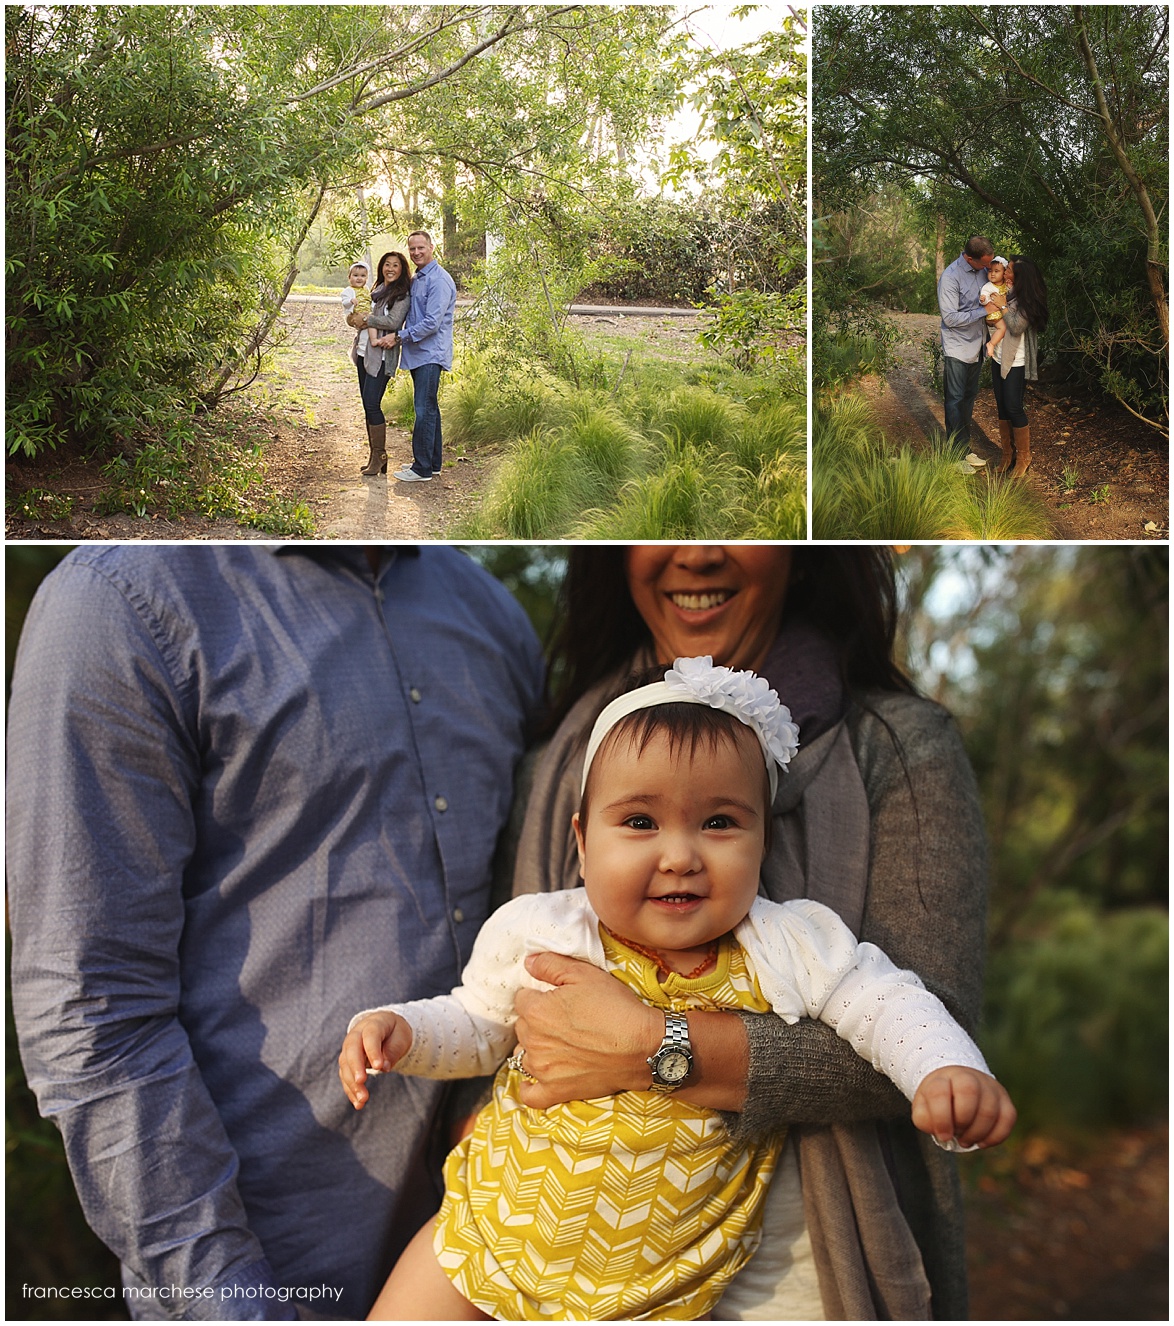 Extended family photography session - Francesca Marchese Photography